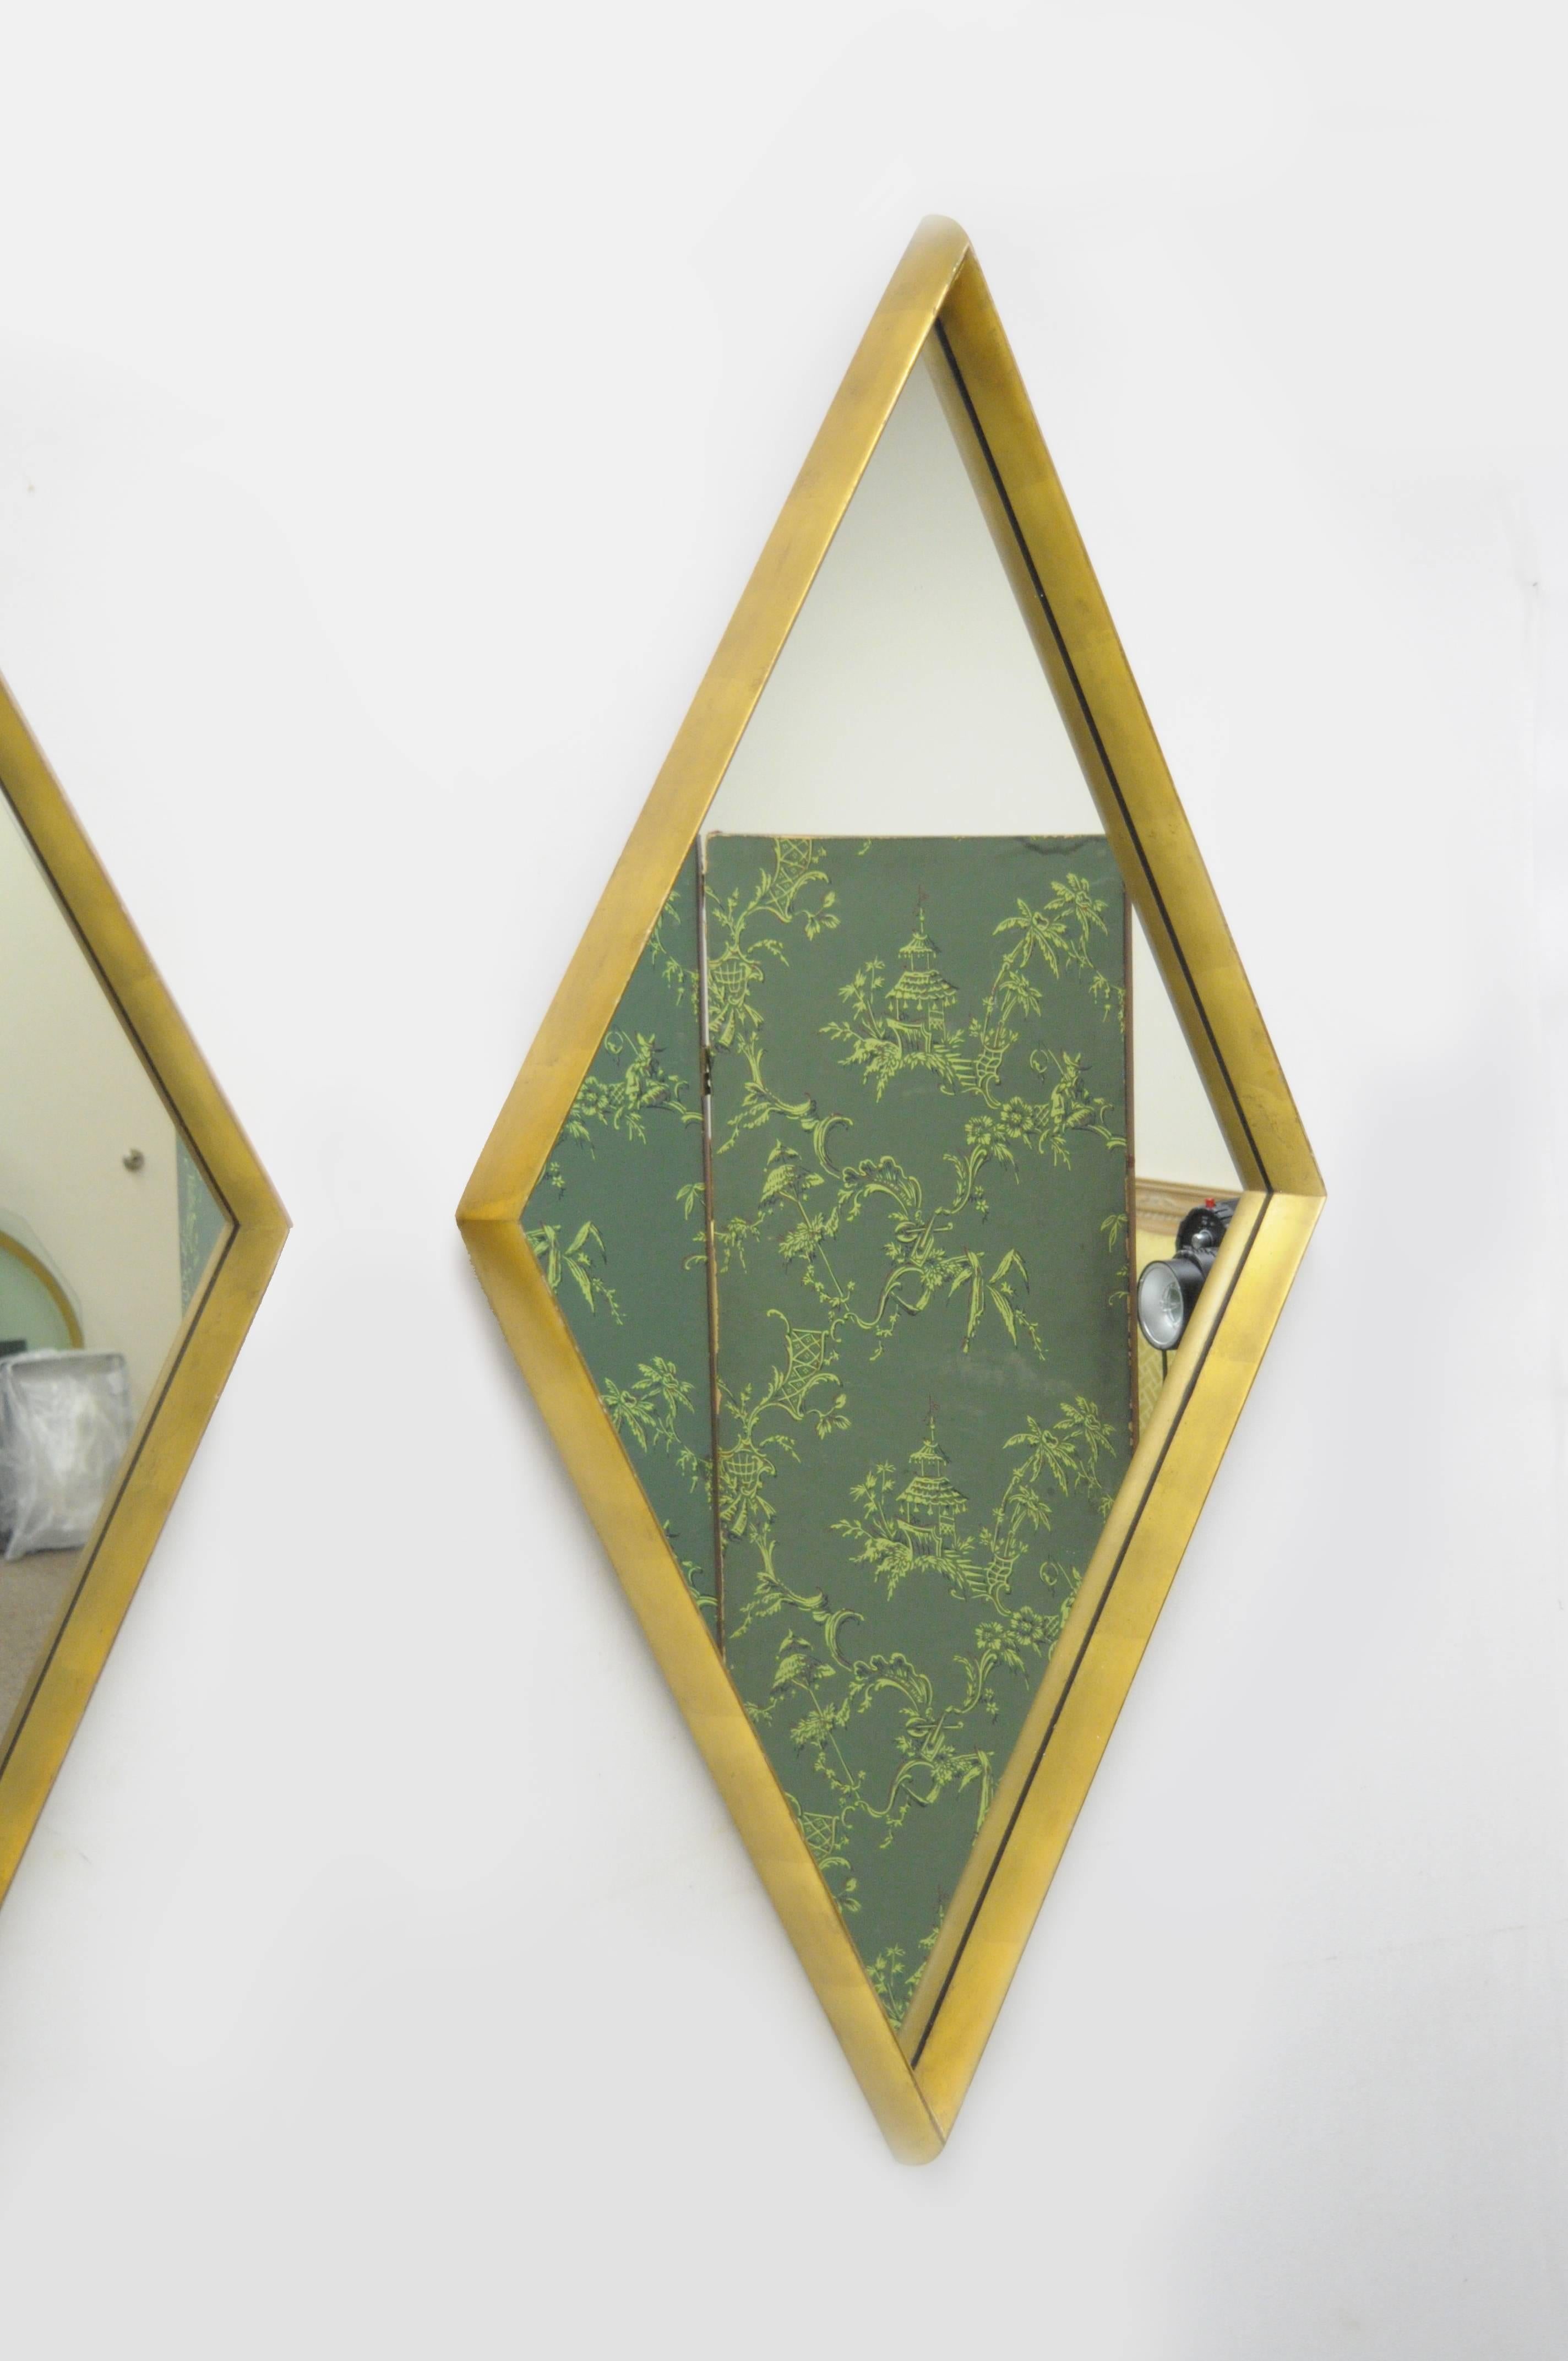 Attractive pair of Vintage Hollywood Regency diamond shape wall mirrors attributed to Labarge with shaped wood deep frames and original antiqued gold leaf finish.